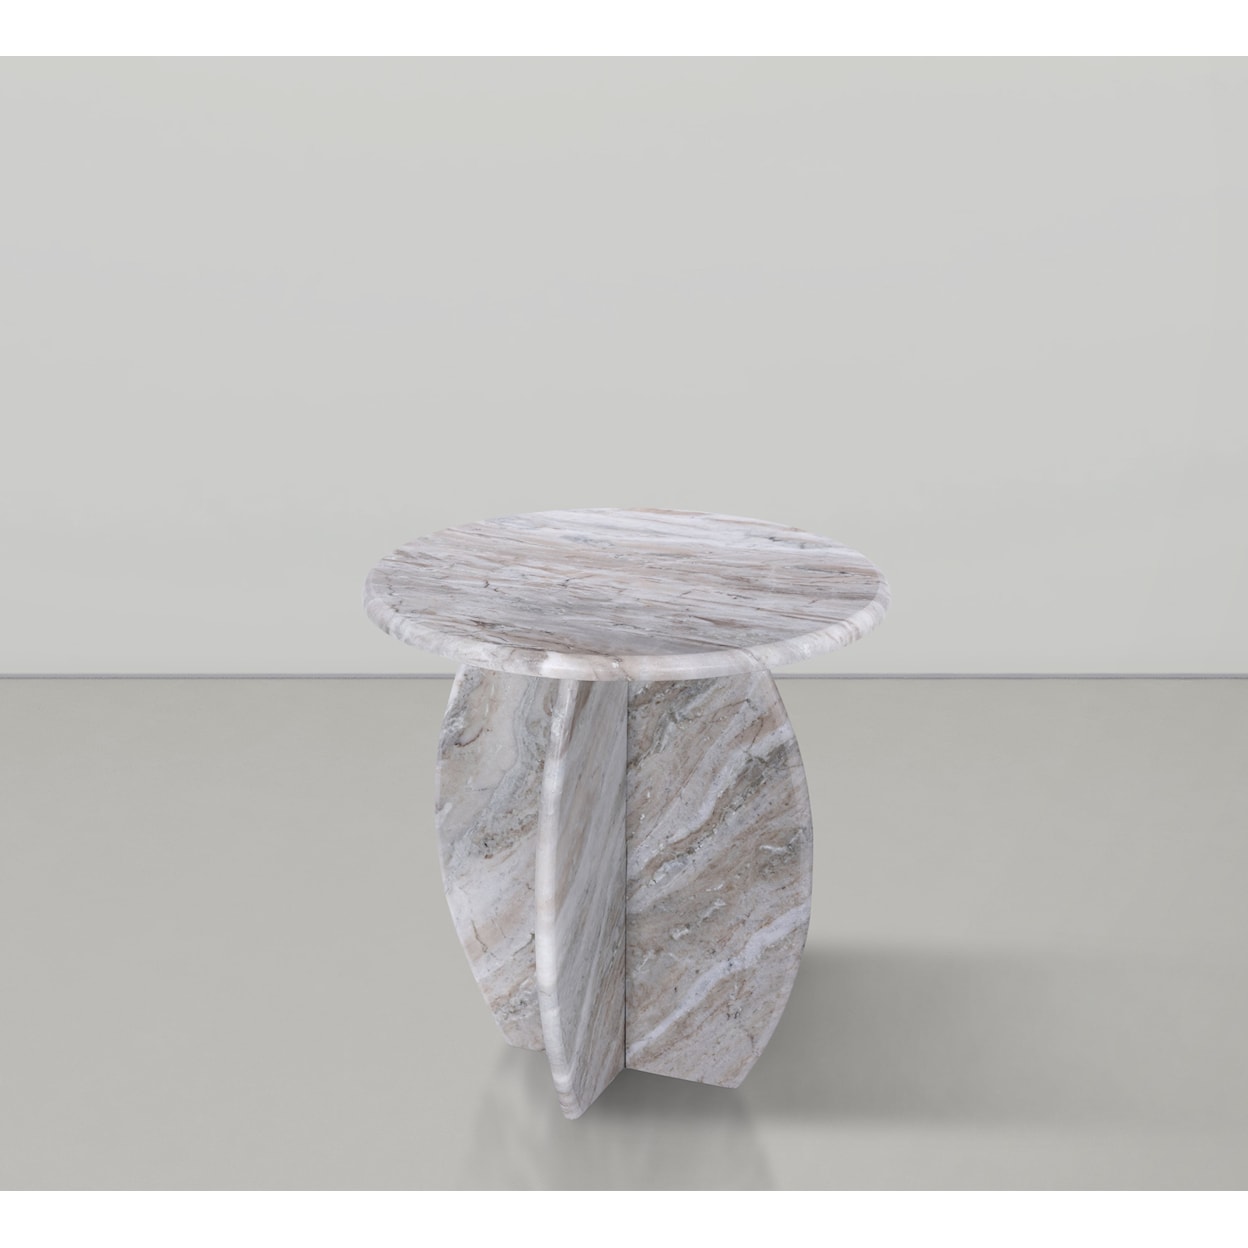 Meridian Furniture Formentera End Table